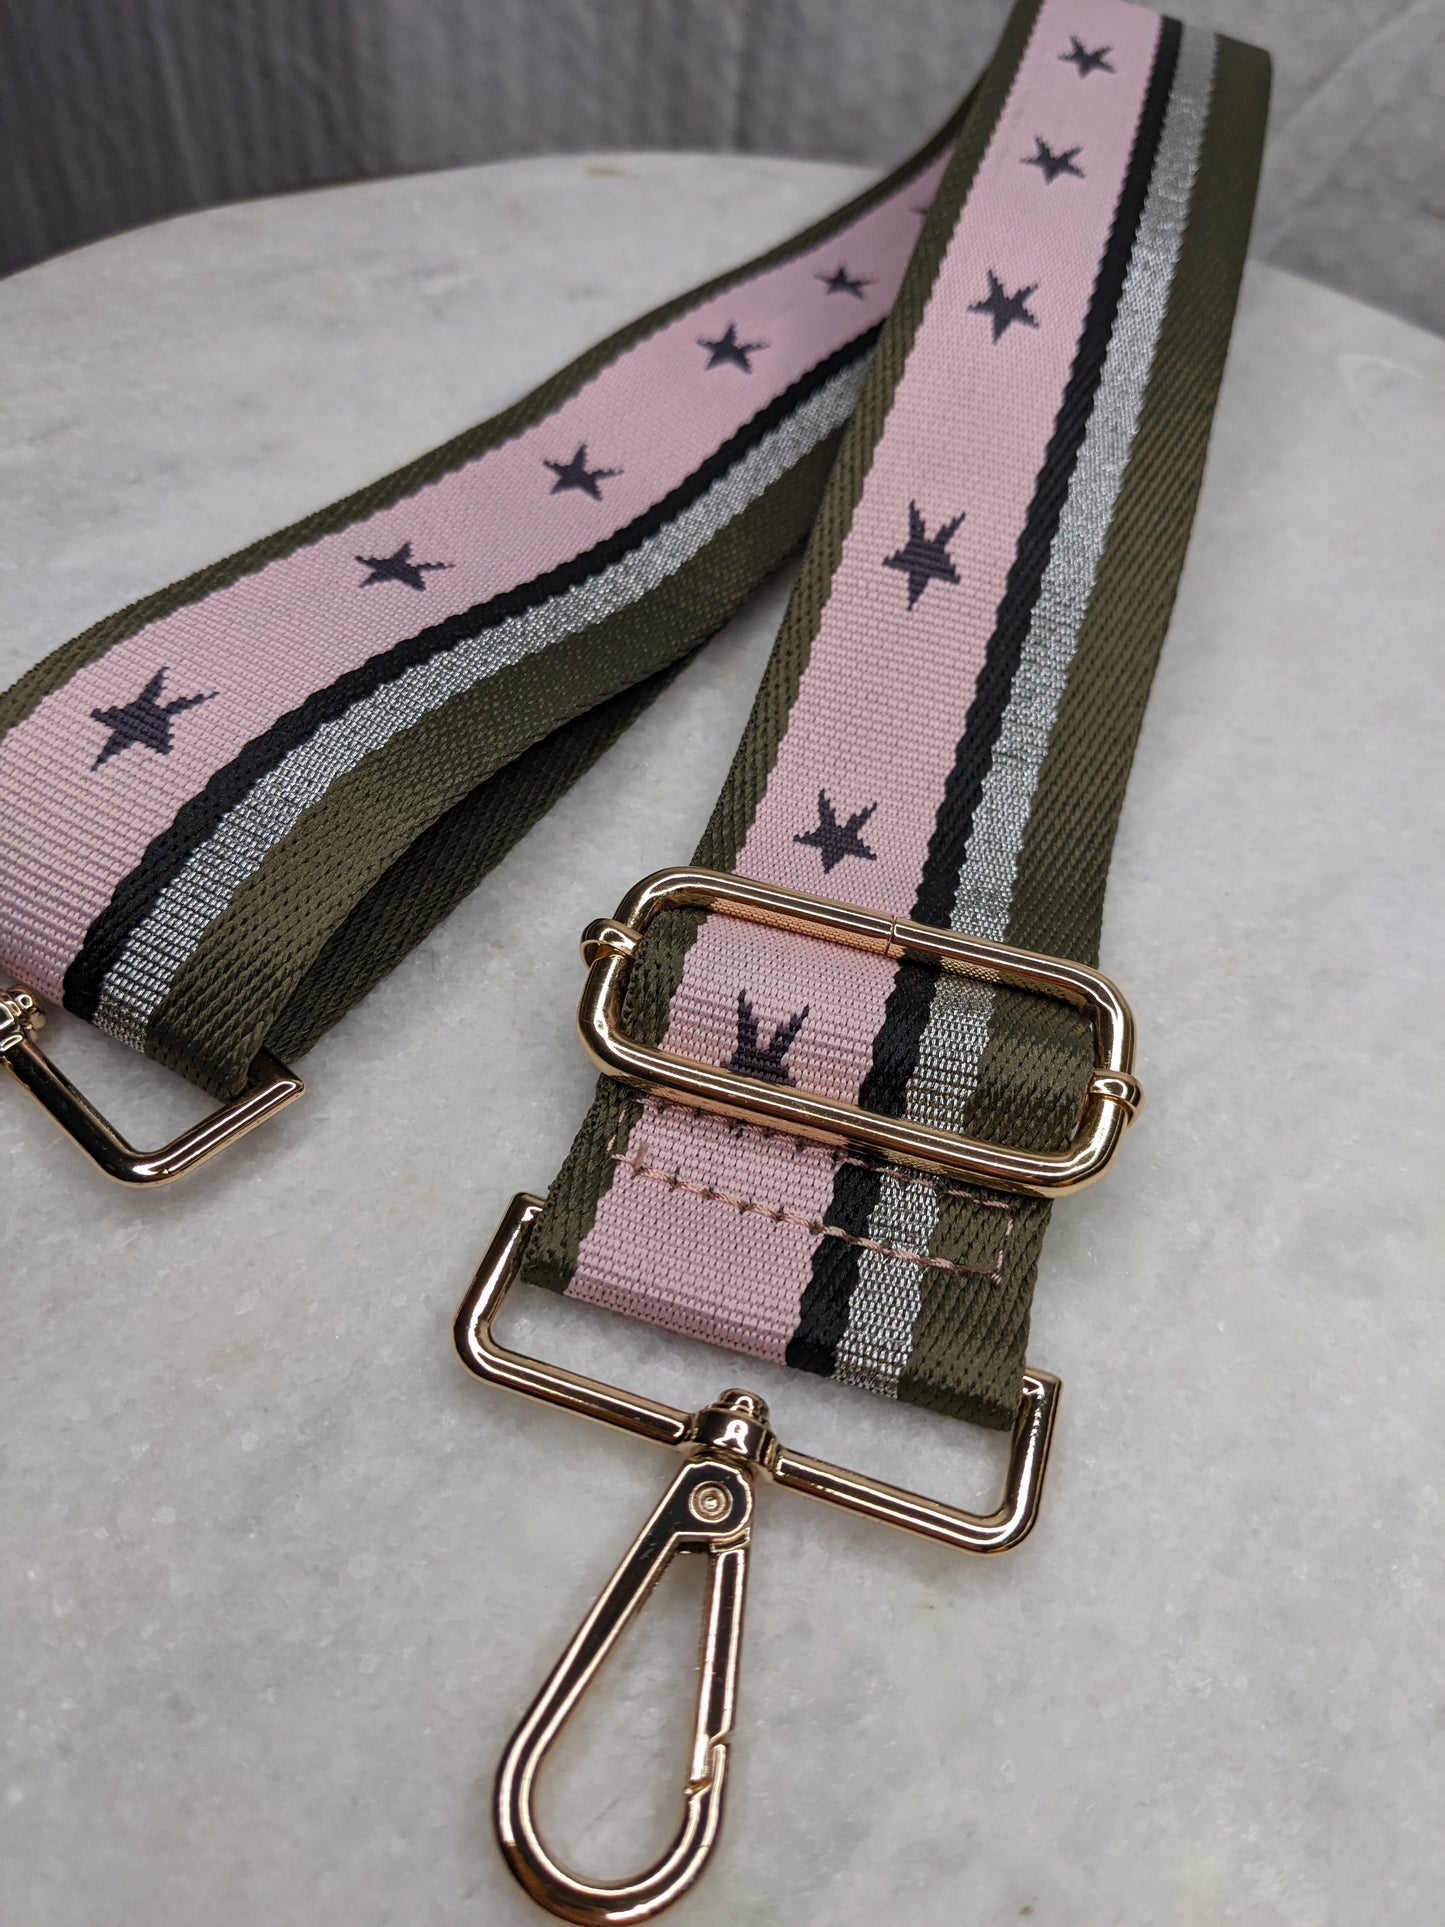 CTHRU Purses Stars and Stripes GI Jane Pink Silver Purse Strap with Gold Accents NWOT